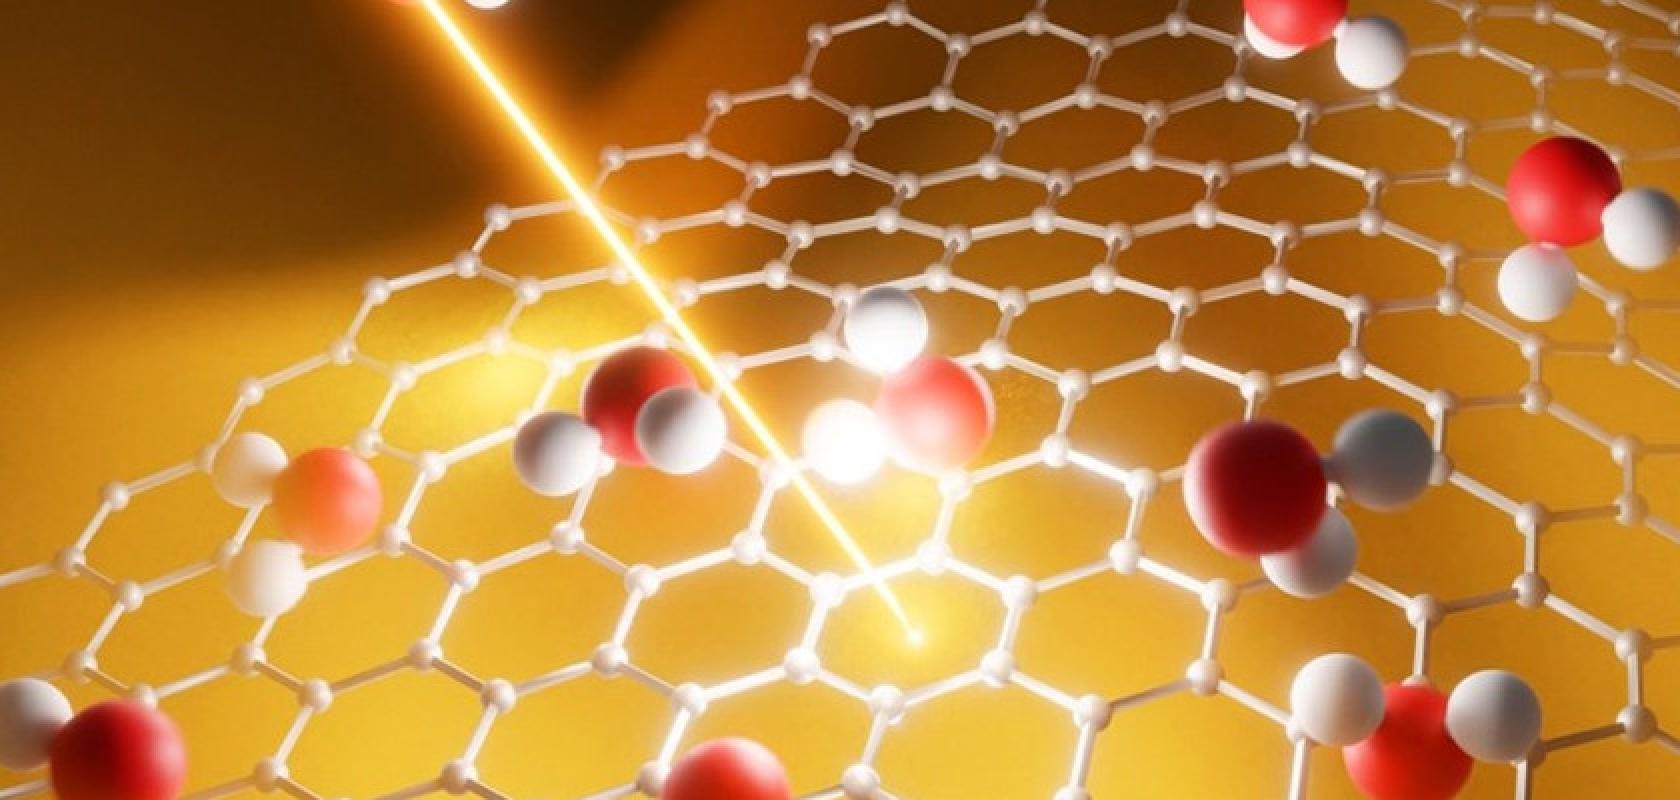 The researchers were able to track the ballistic movement of electrons in graphene material with a new approach (Image: The University of Manchester) 